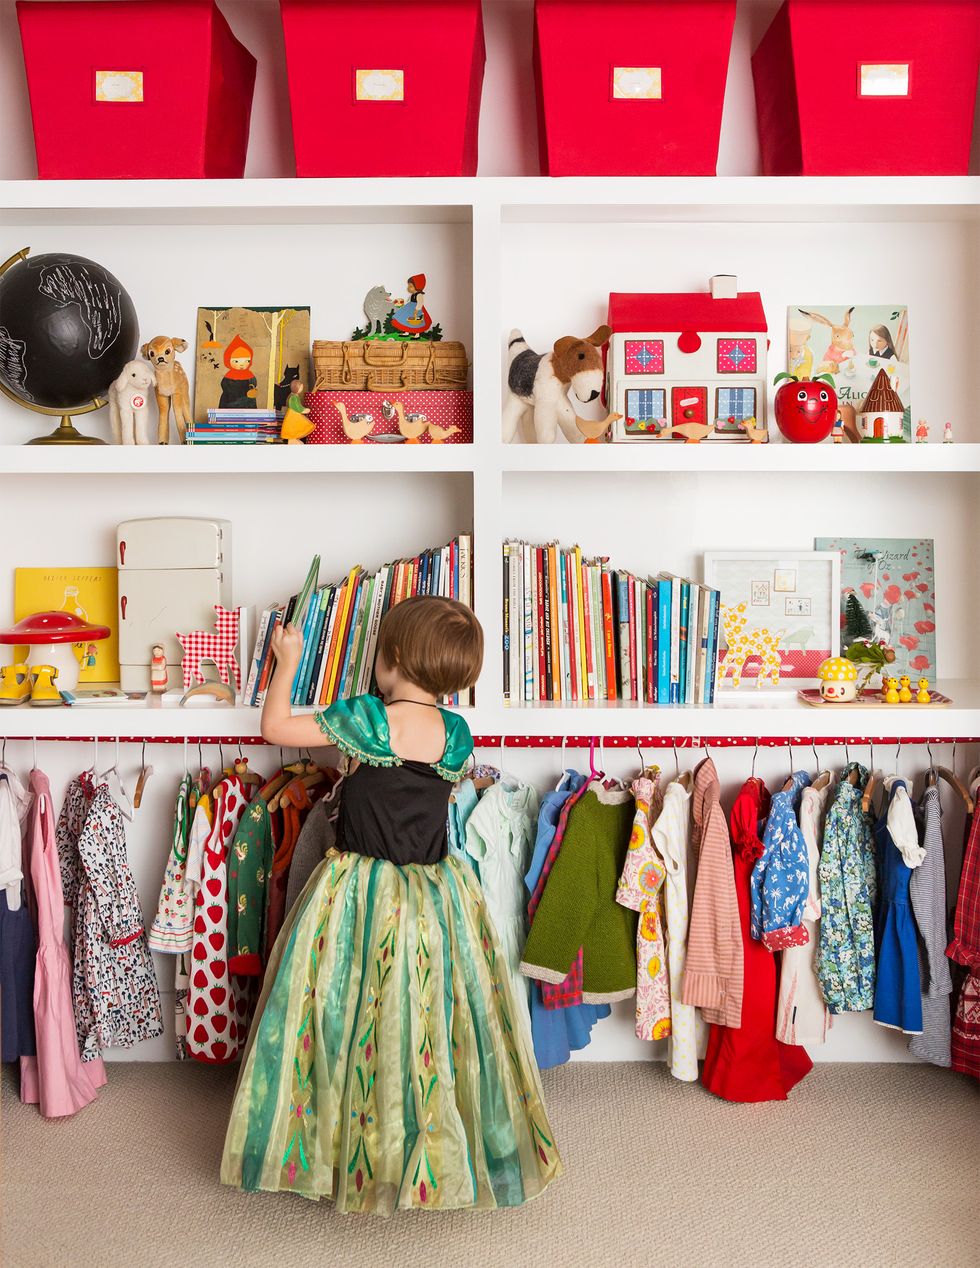 a child in a dress browsing shelves